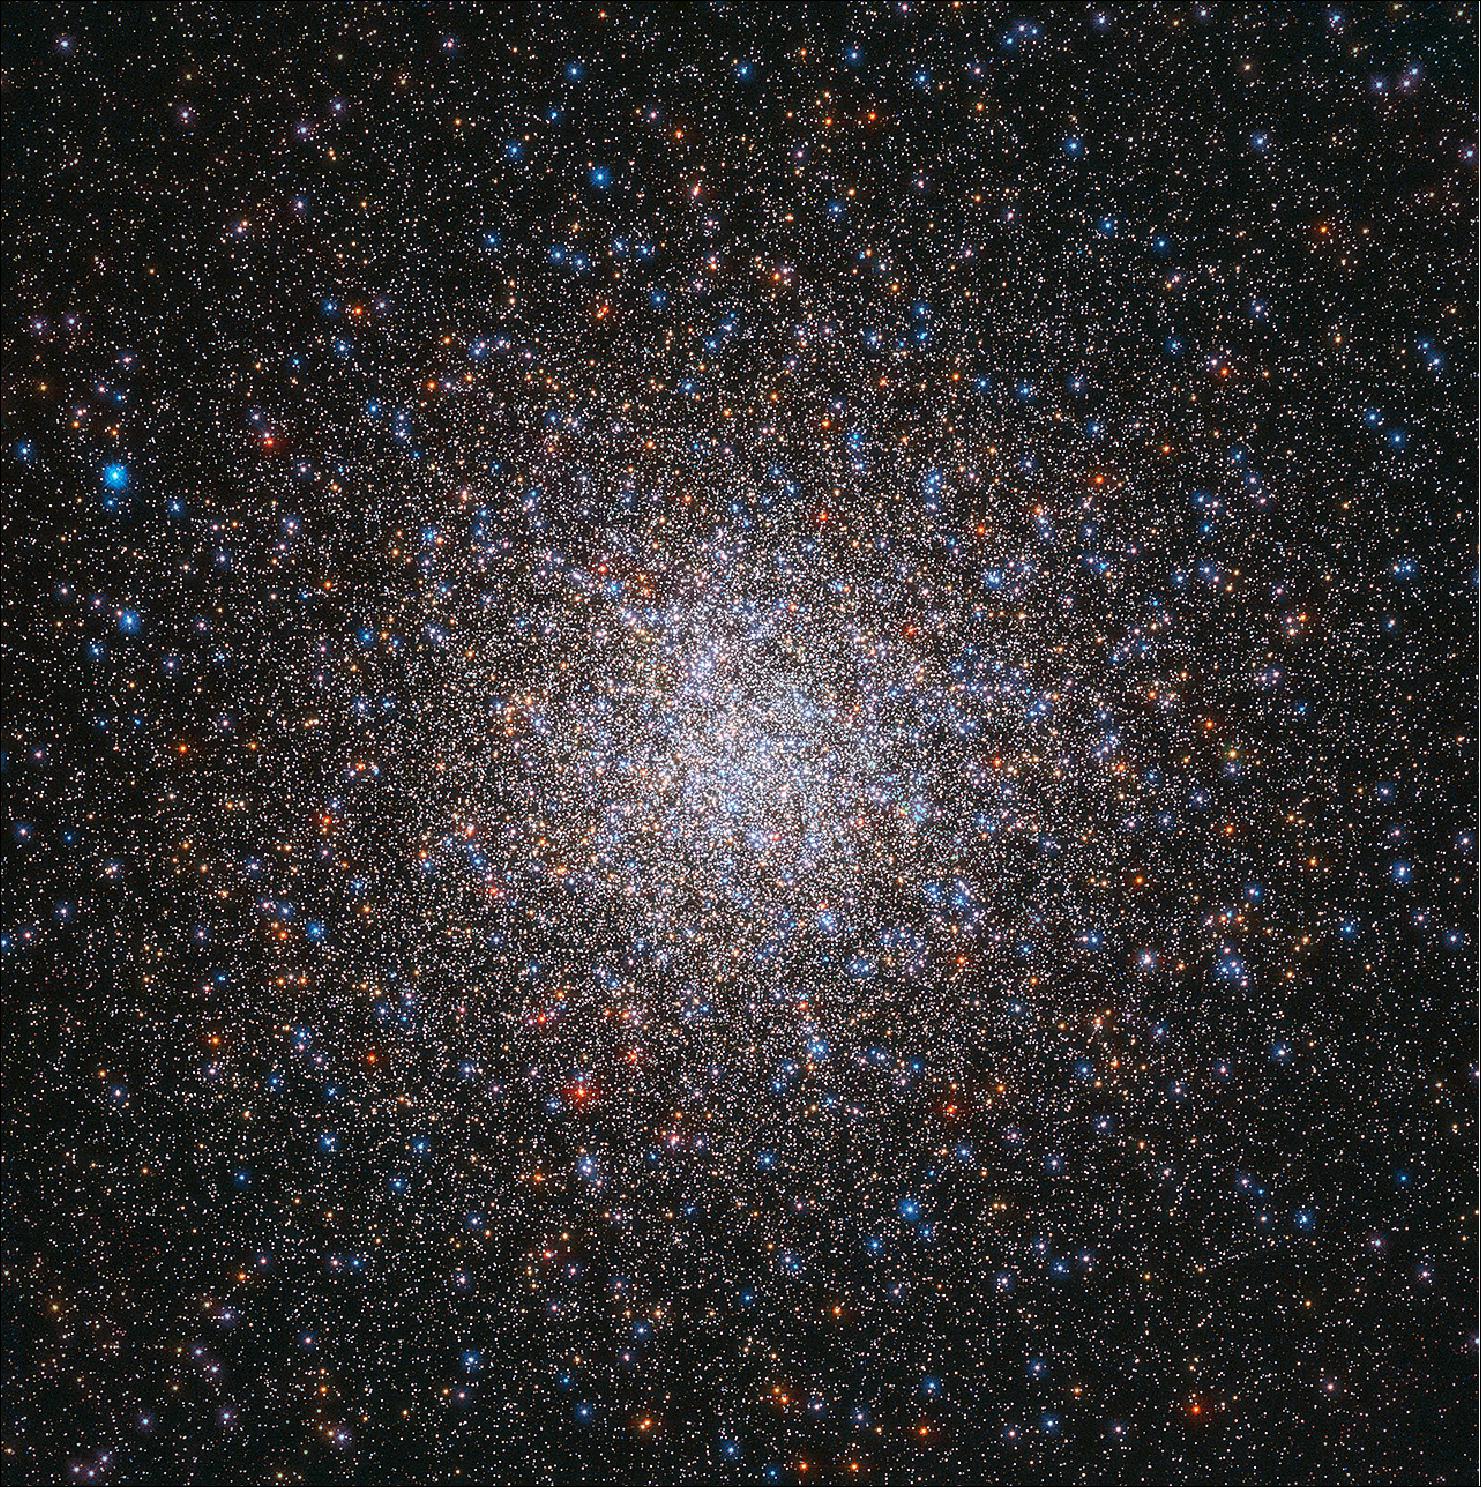 Figure 61: This Hubble image of Messier 2’s core was created using visible and infrared light. Most of the cluster’s mass is concentrated at its center, with shimmering streams of stars extending outward into space. It is bright enough that it can even be seen with the naked eye when observing conditions are extremely good (image credit: ESA/Hubble & NASA, G. Piotto et al.)